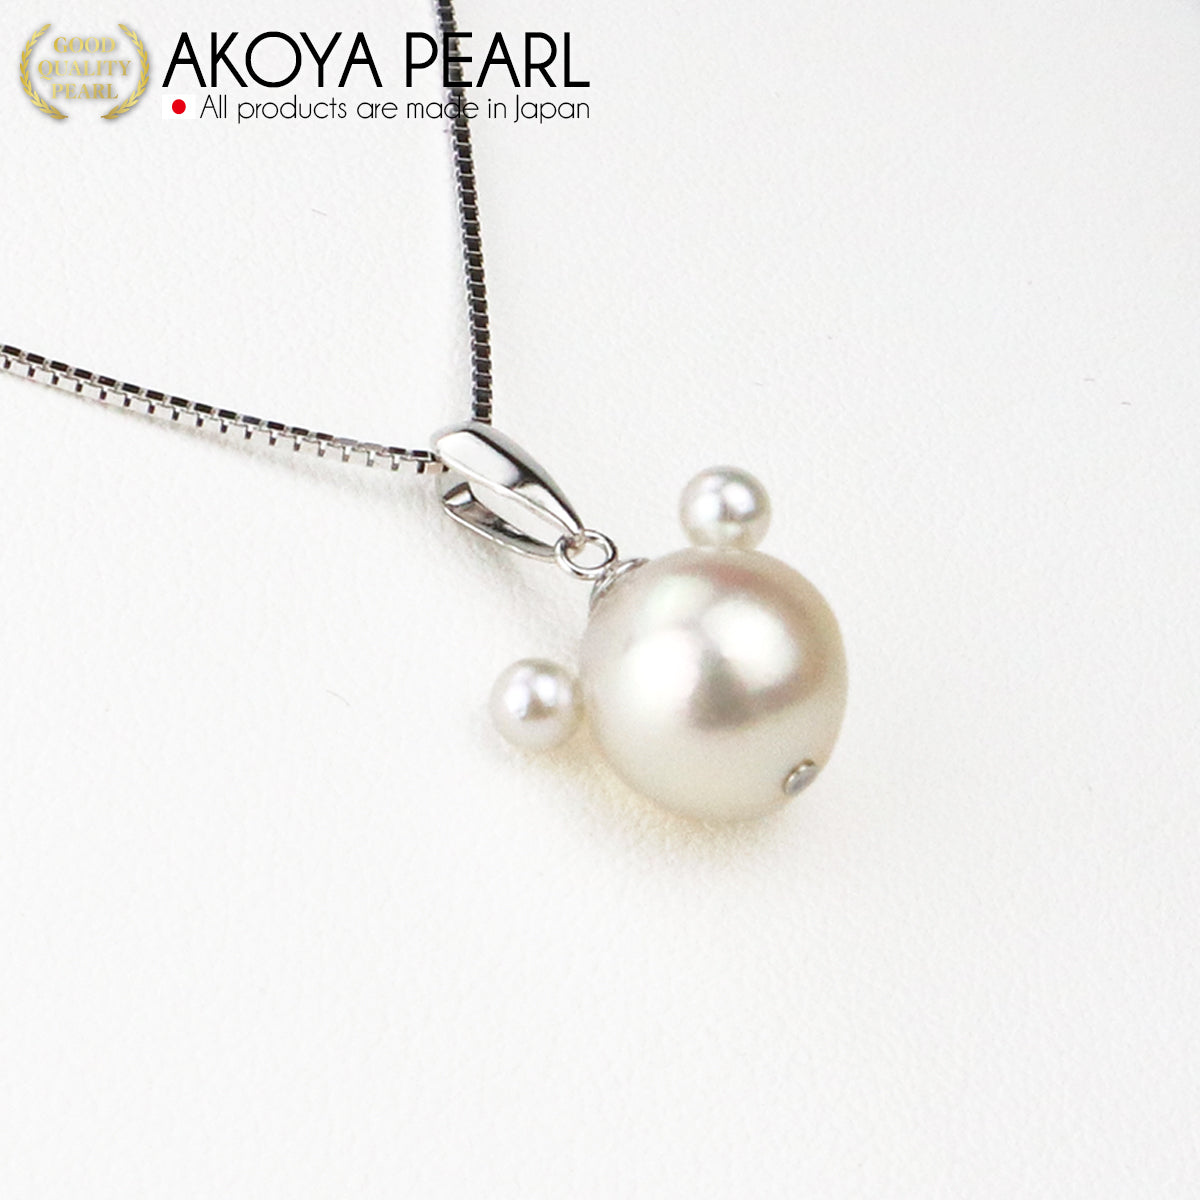 Akoya Pearl Polar Bear Peace Pearl Necklace [9.0mm] Official Goods Silver SV925 Venetian Chain Ehime Prefectural Tobe Zoo Collaboration Certificate of Origin Storage Case Included (4022)